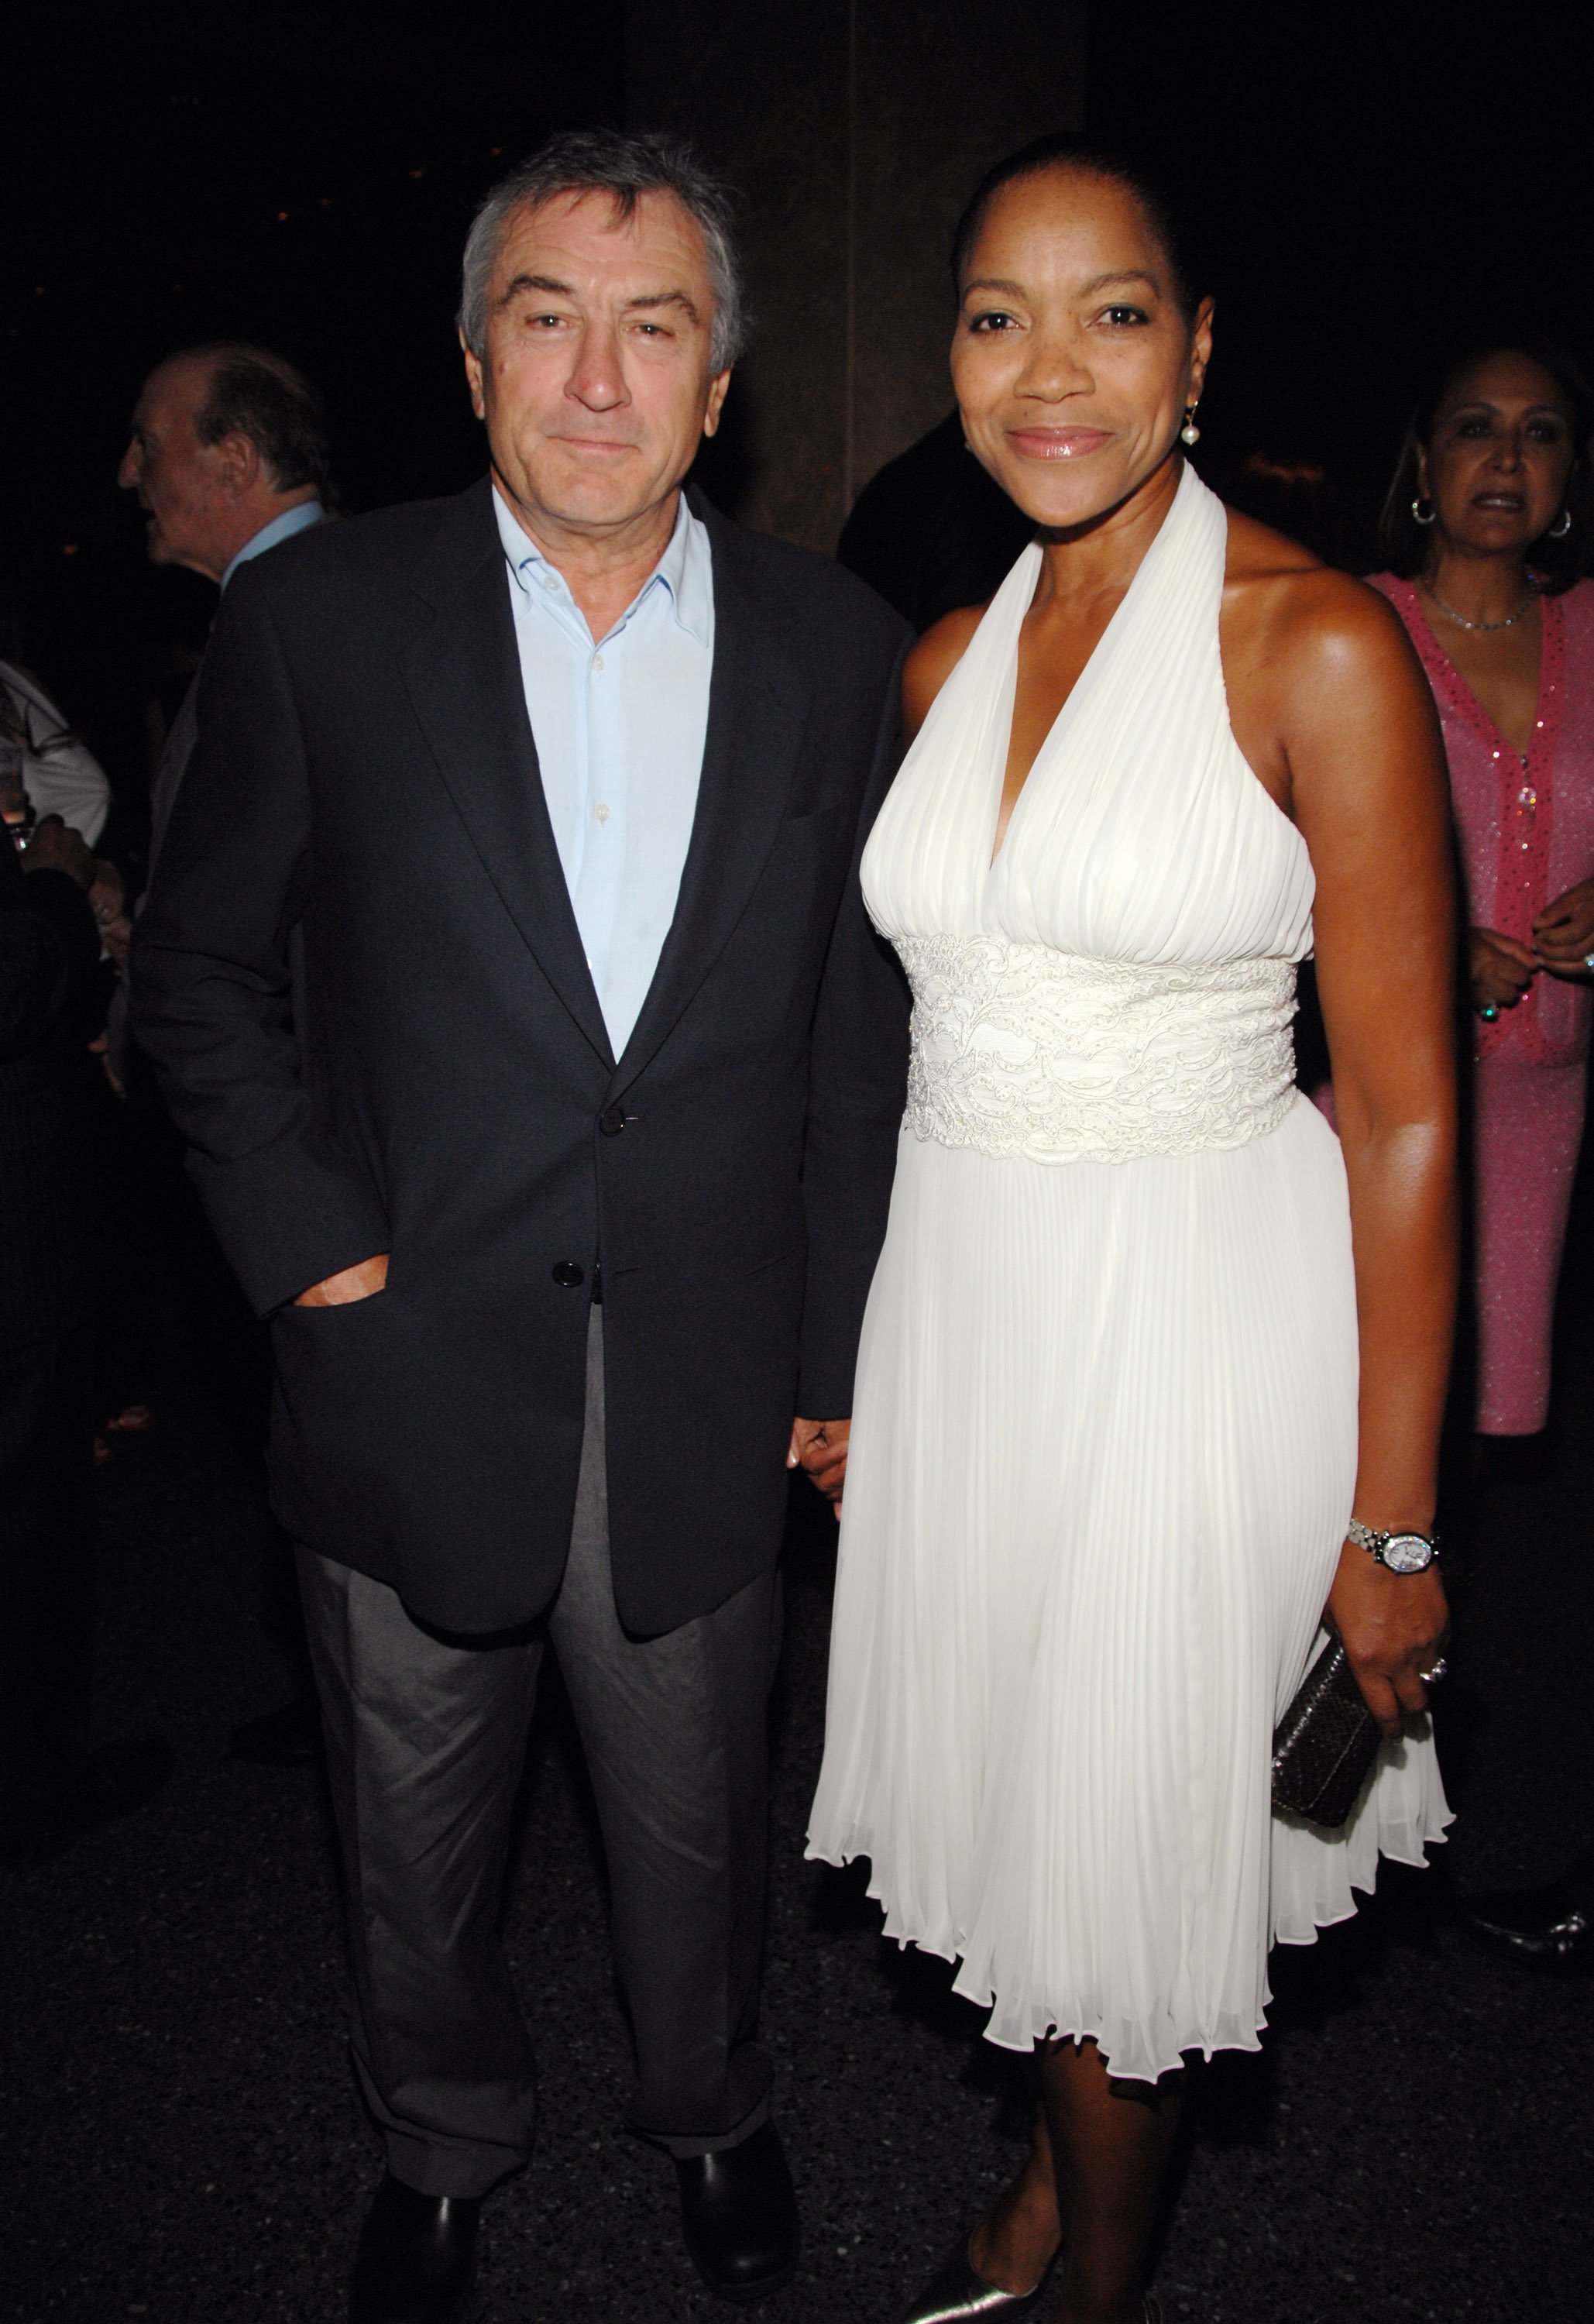 Robert De Niro and Grace Hightower during Tony Bennett's 80th Birthday Party - Inside in New York City, New York, United States | Source: Getty Images 